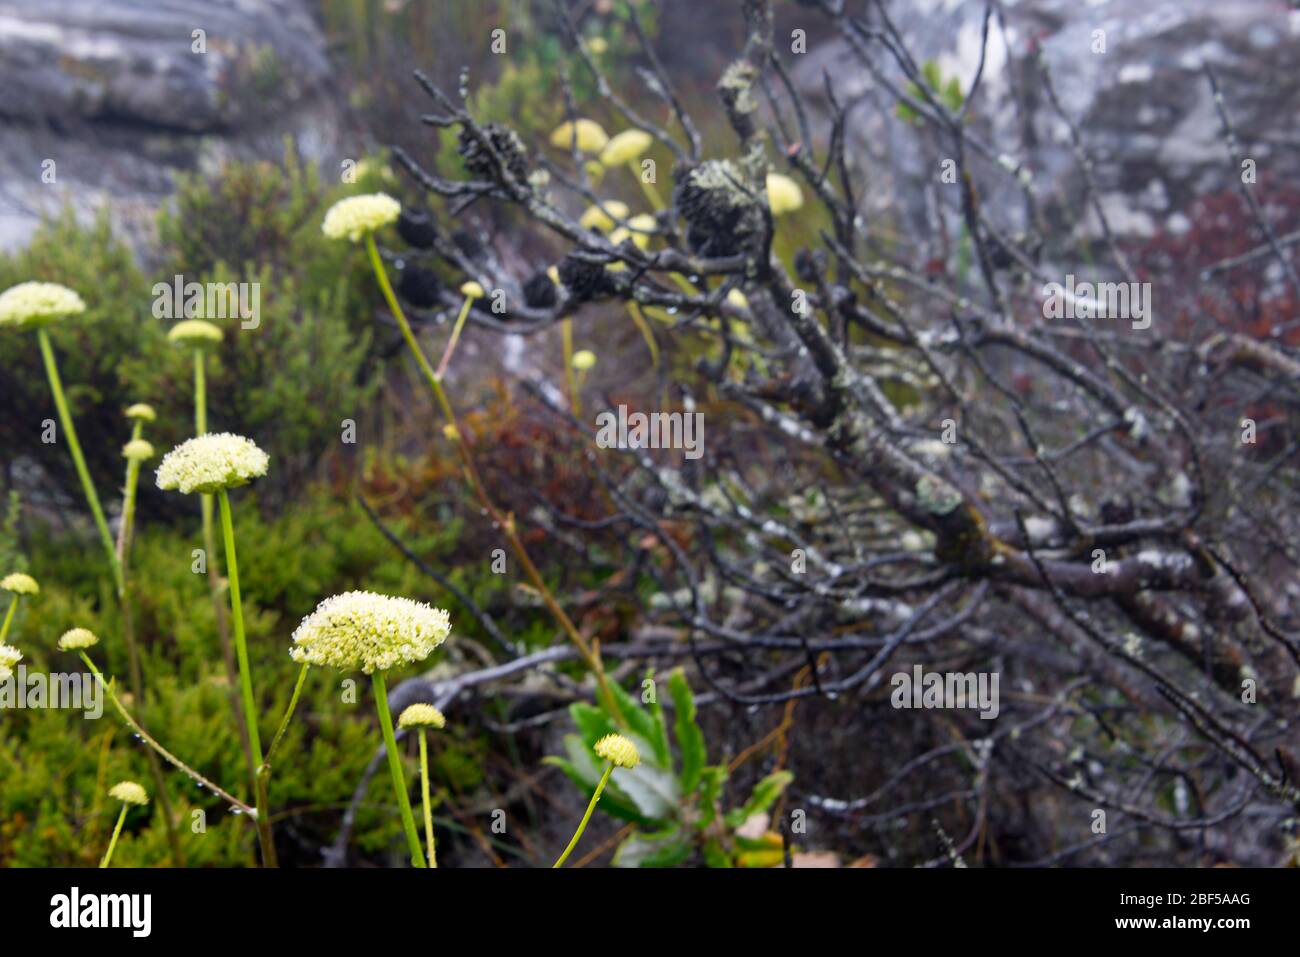 fynbos endemic cape flora at table mountain, cape town, south africa Stock Photo